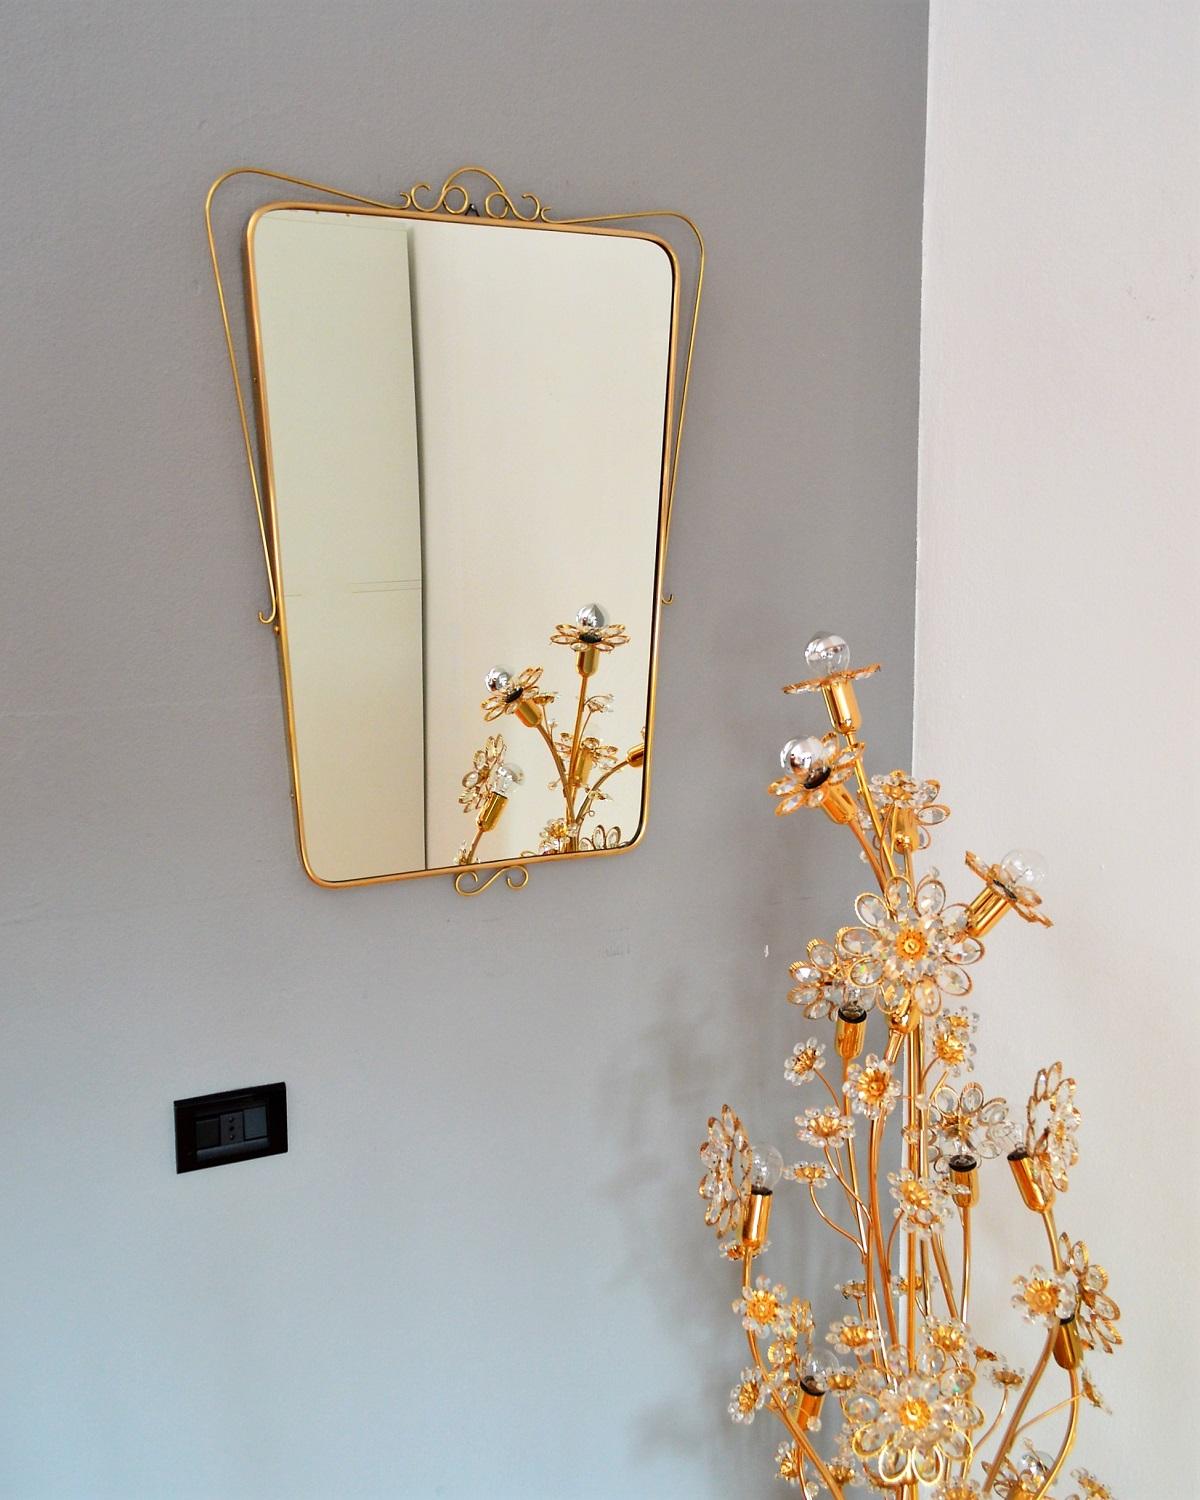 Mid-Century Modern Italian Midcentury Wall Mirror with Brass Frame and Decor, 1950s